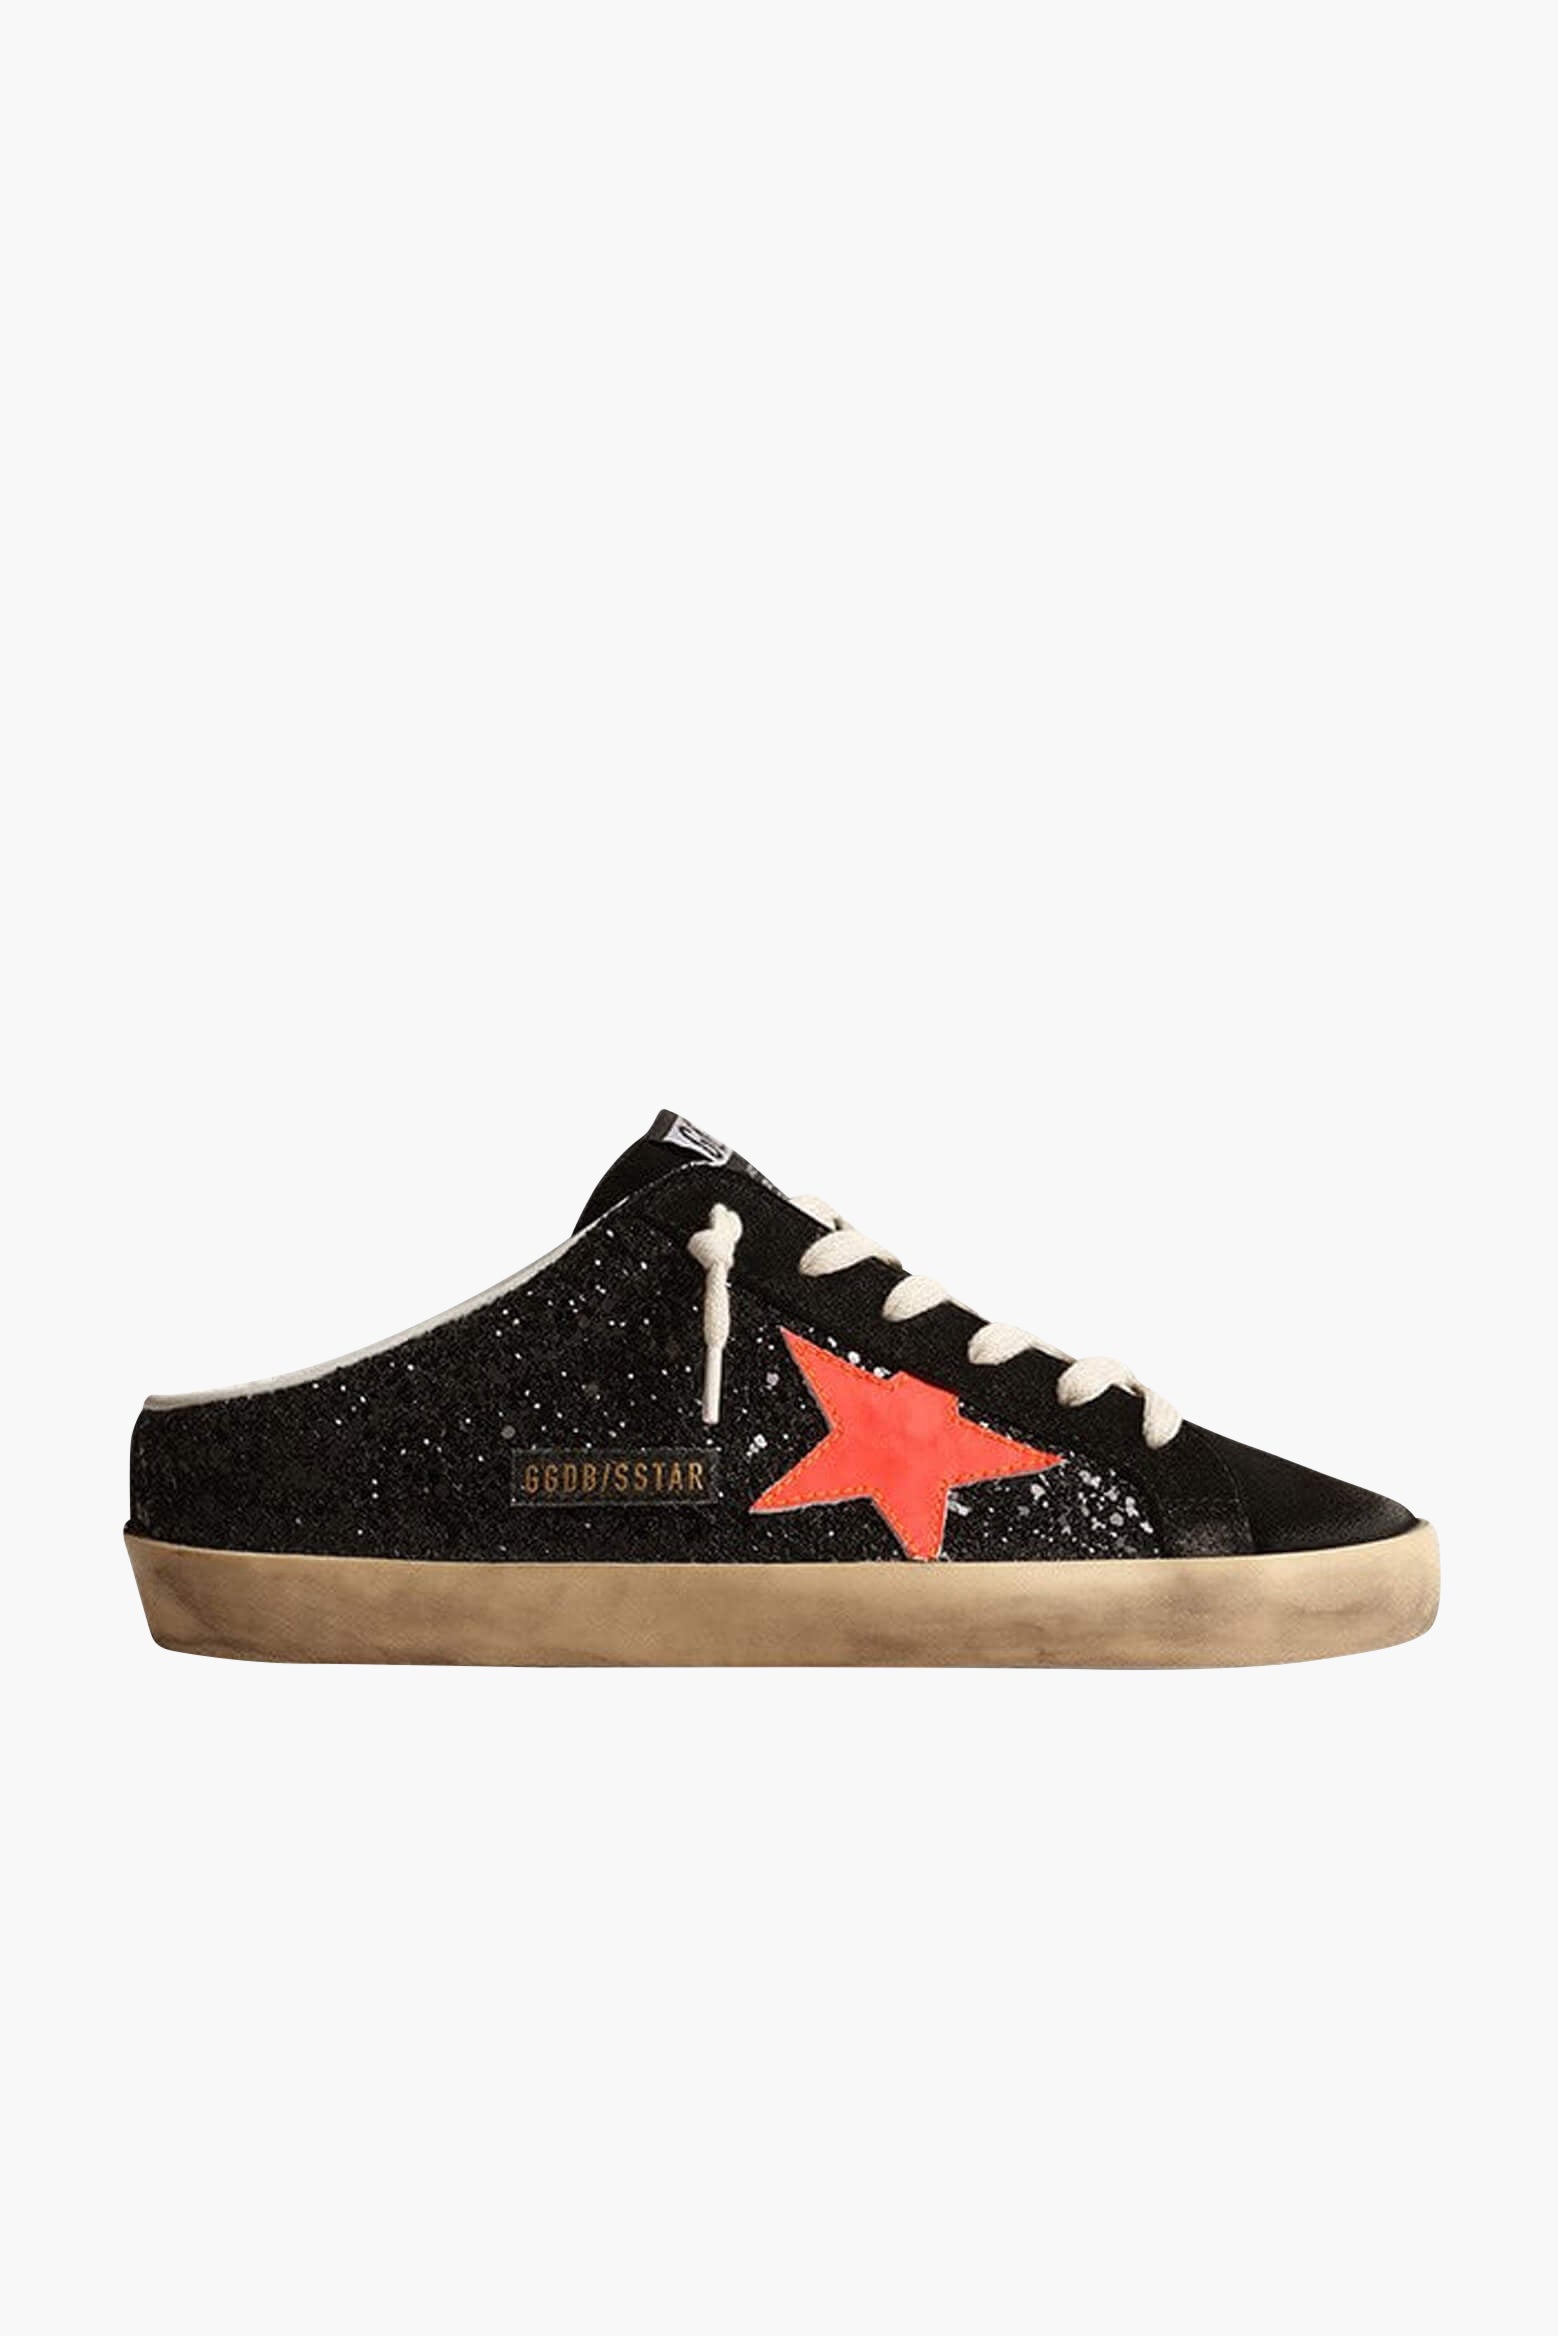 Golden Goose Superstar Sabot Glitter Sneakers in Black/Coral Red available at TNT The New Trend Australia.